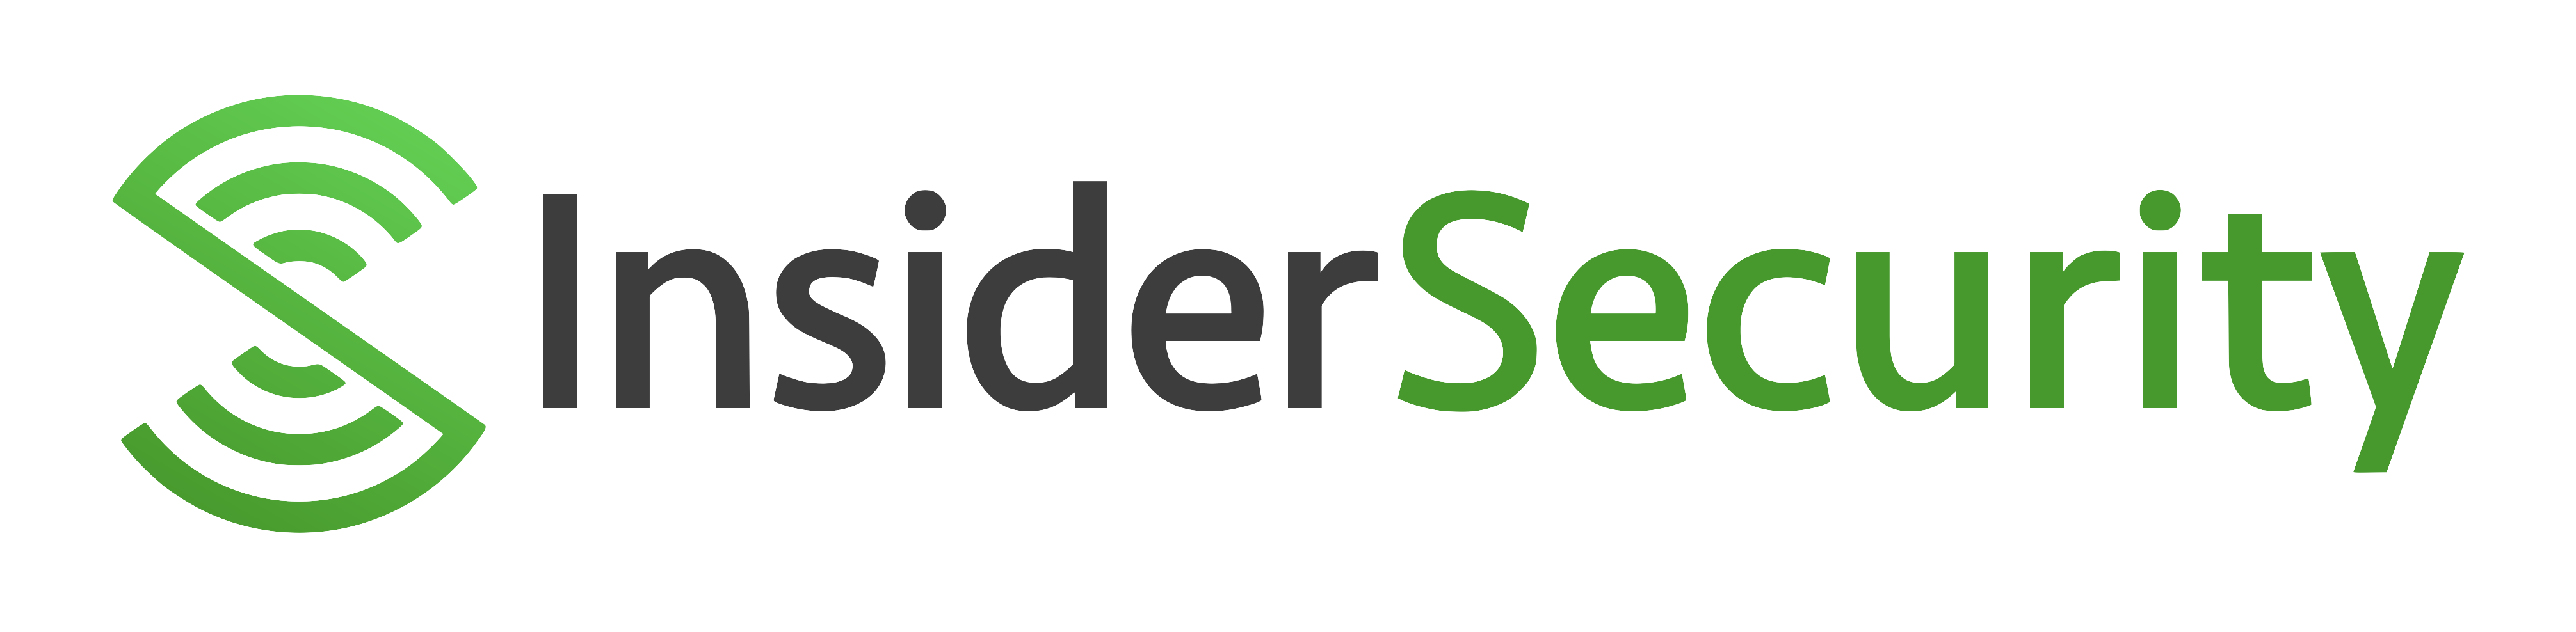 https://ice71.sg/wp-content/uploads/2022/02/InsiderSecurity-Logo-transparent-Jonathan-Phua-1024x251.png